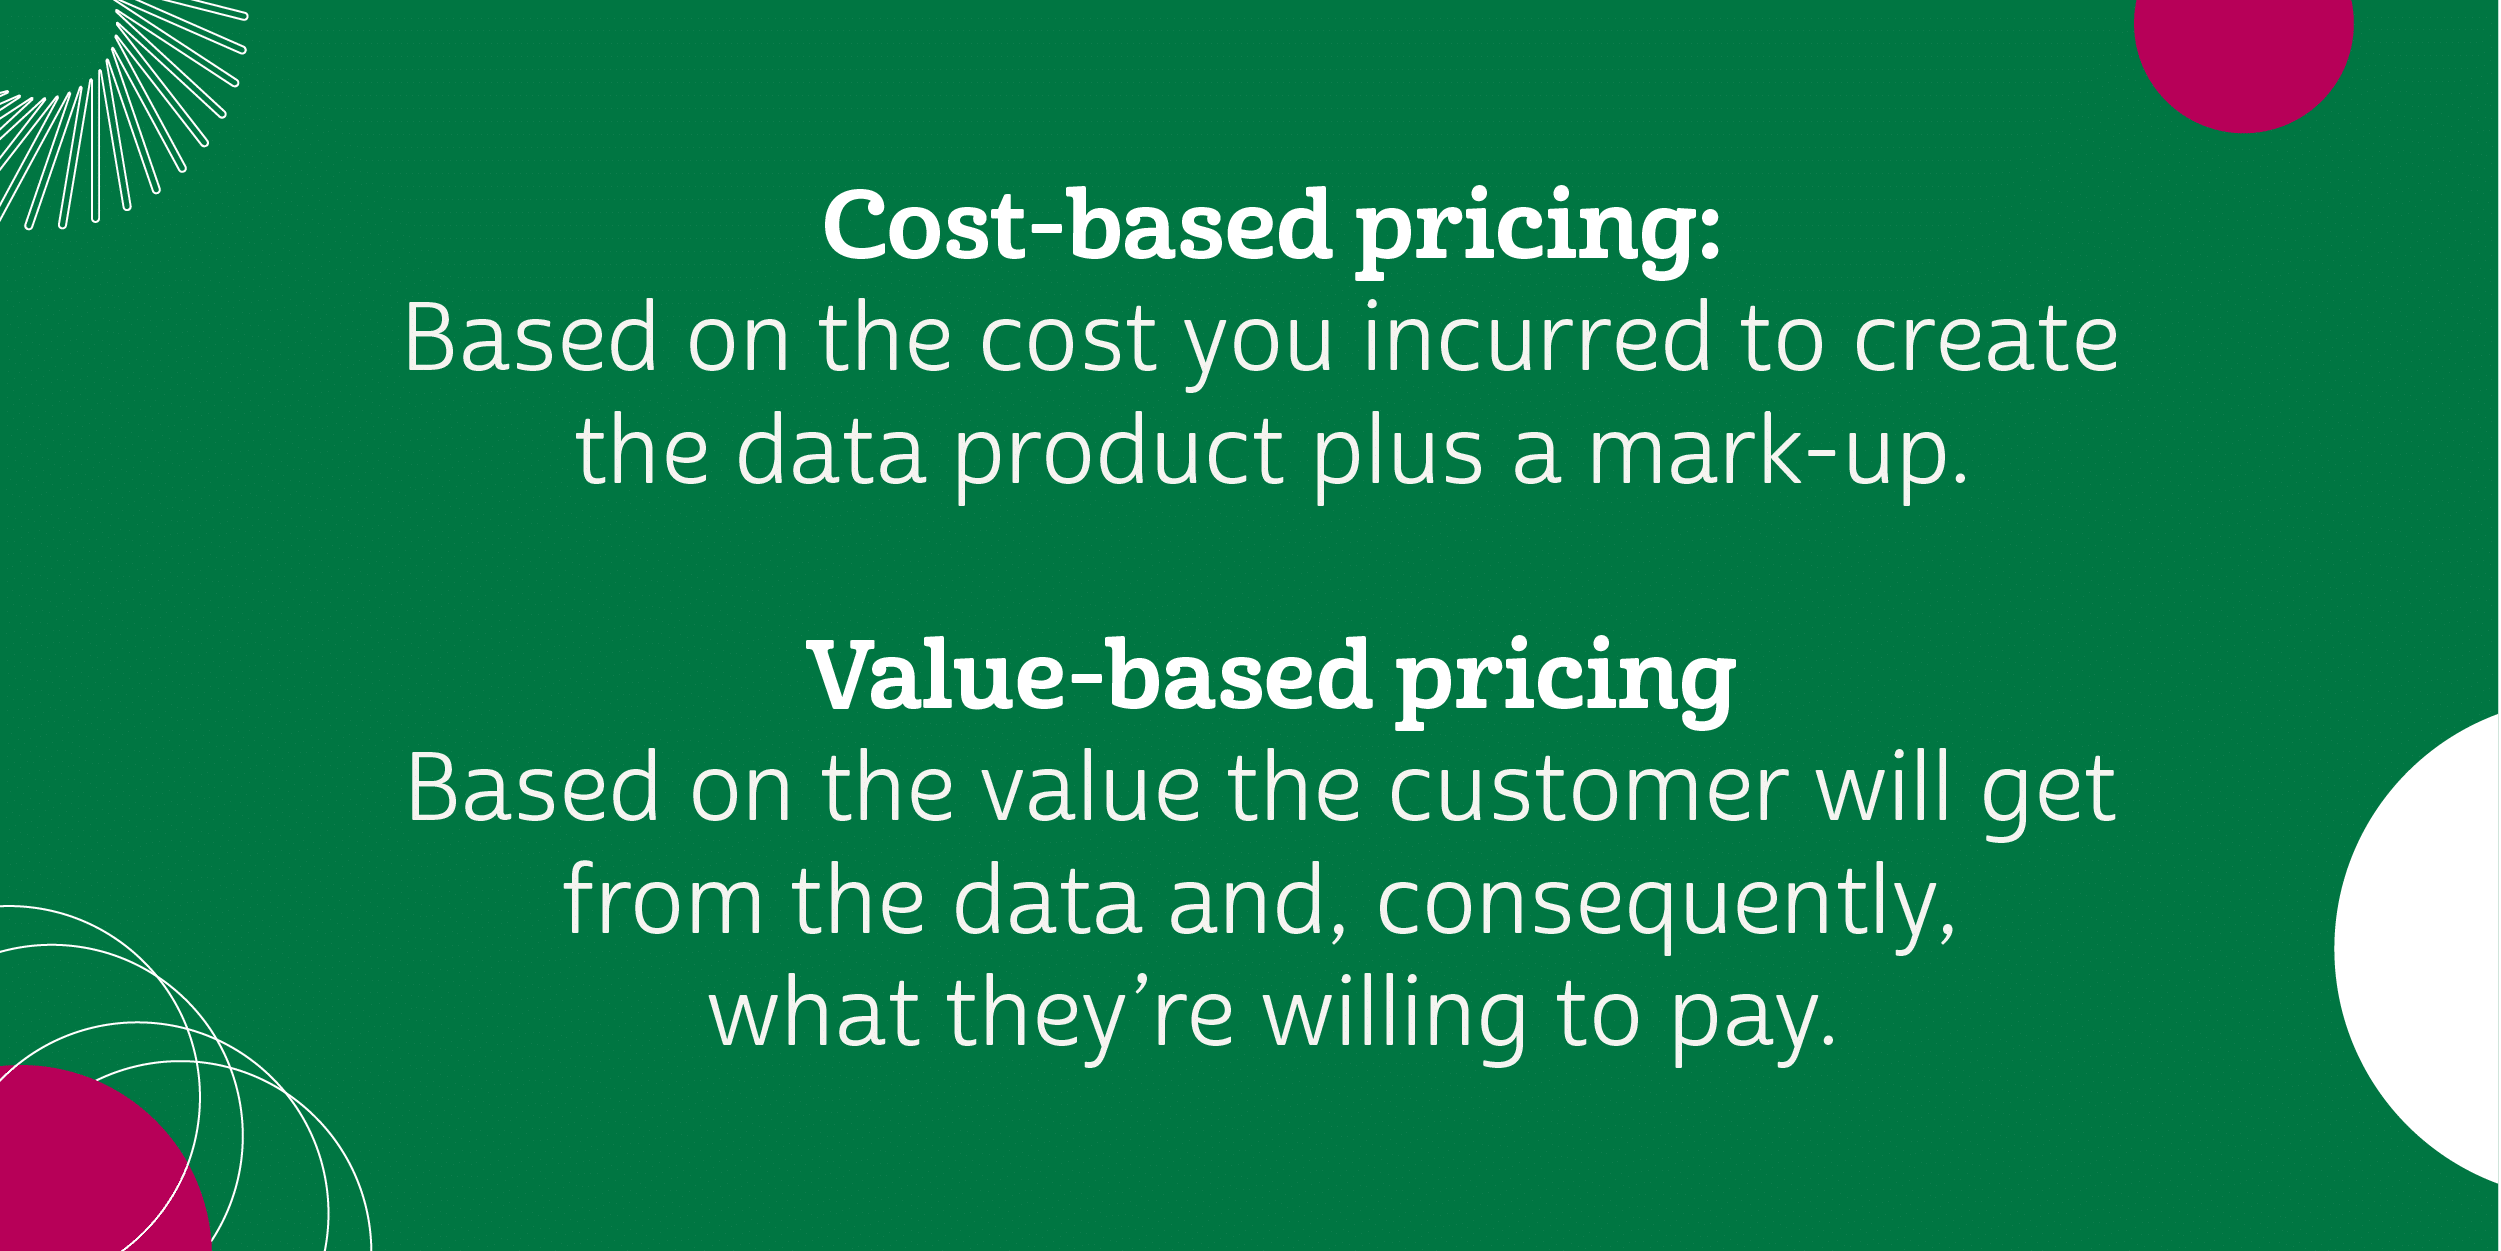 buying and selling data costs and pricing - section title